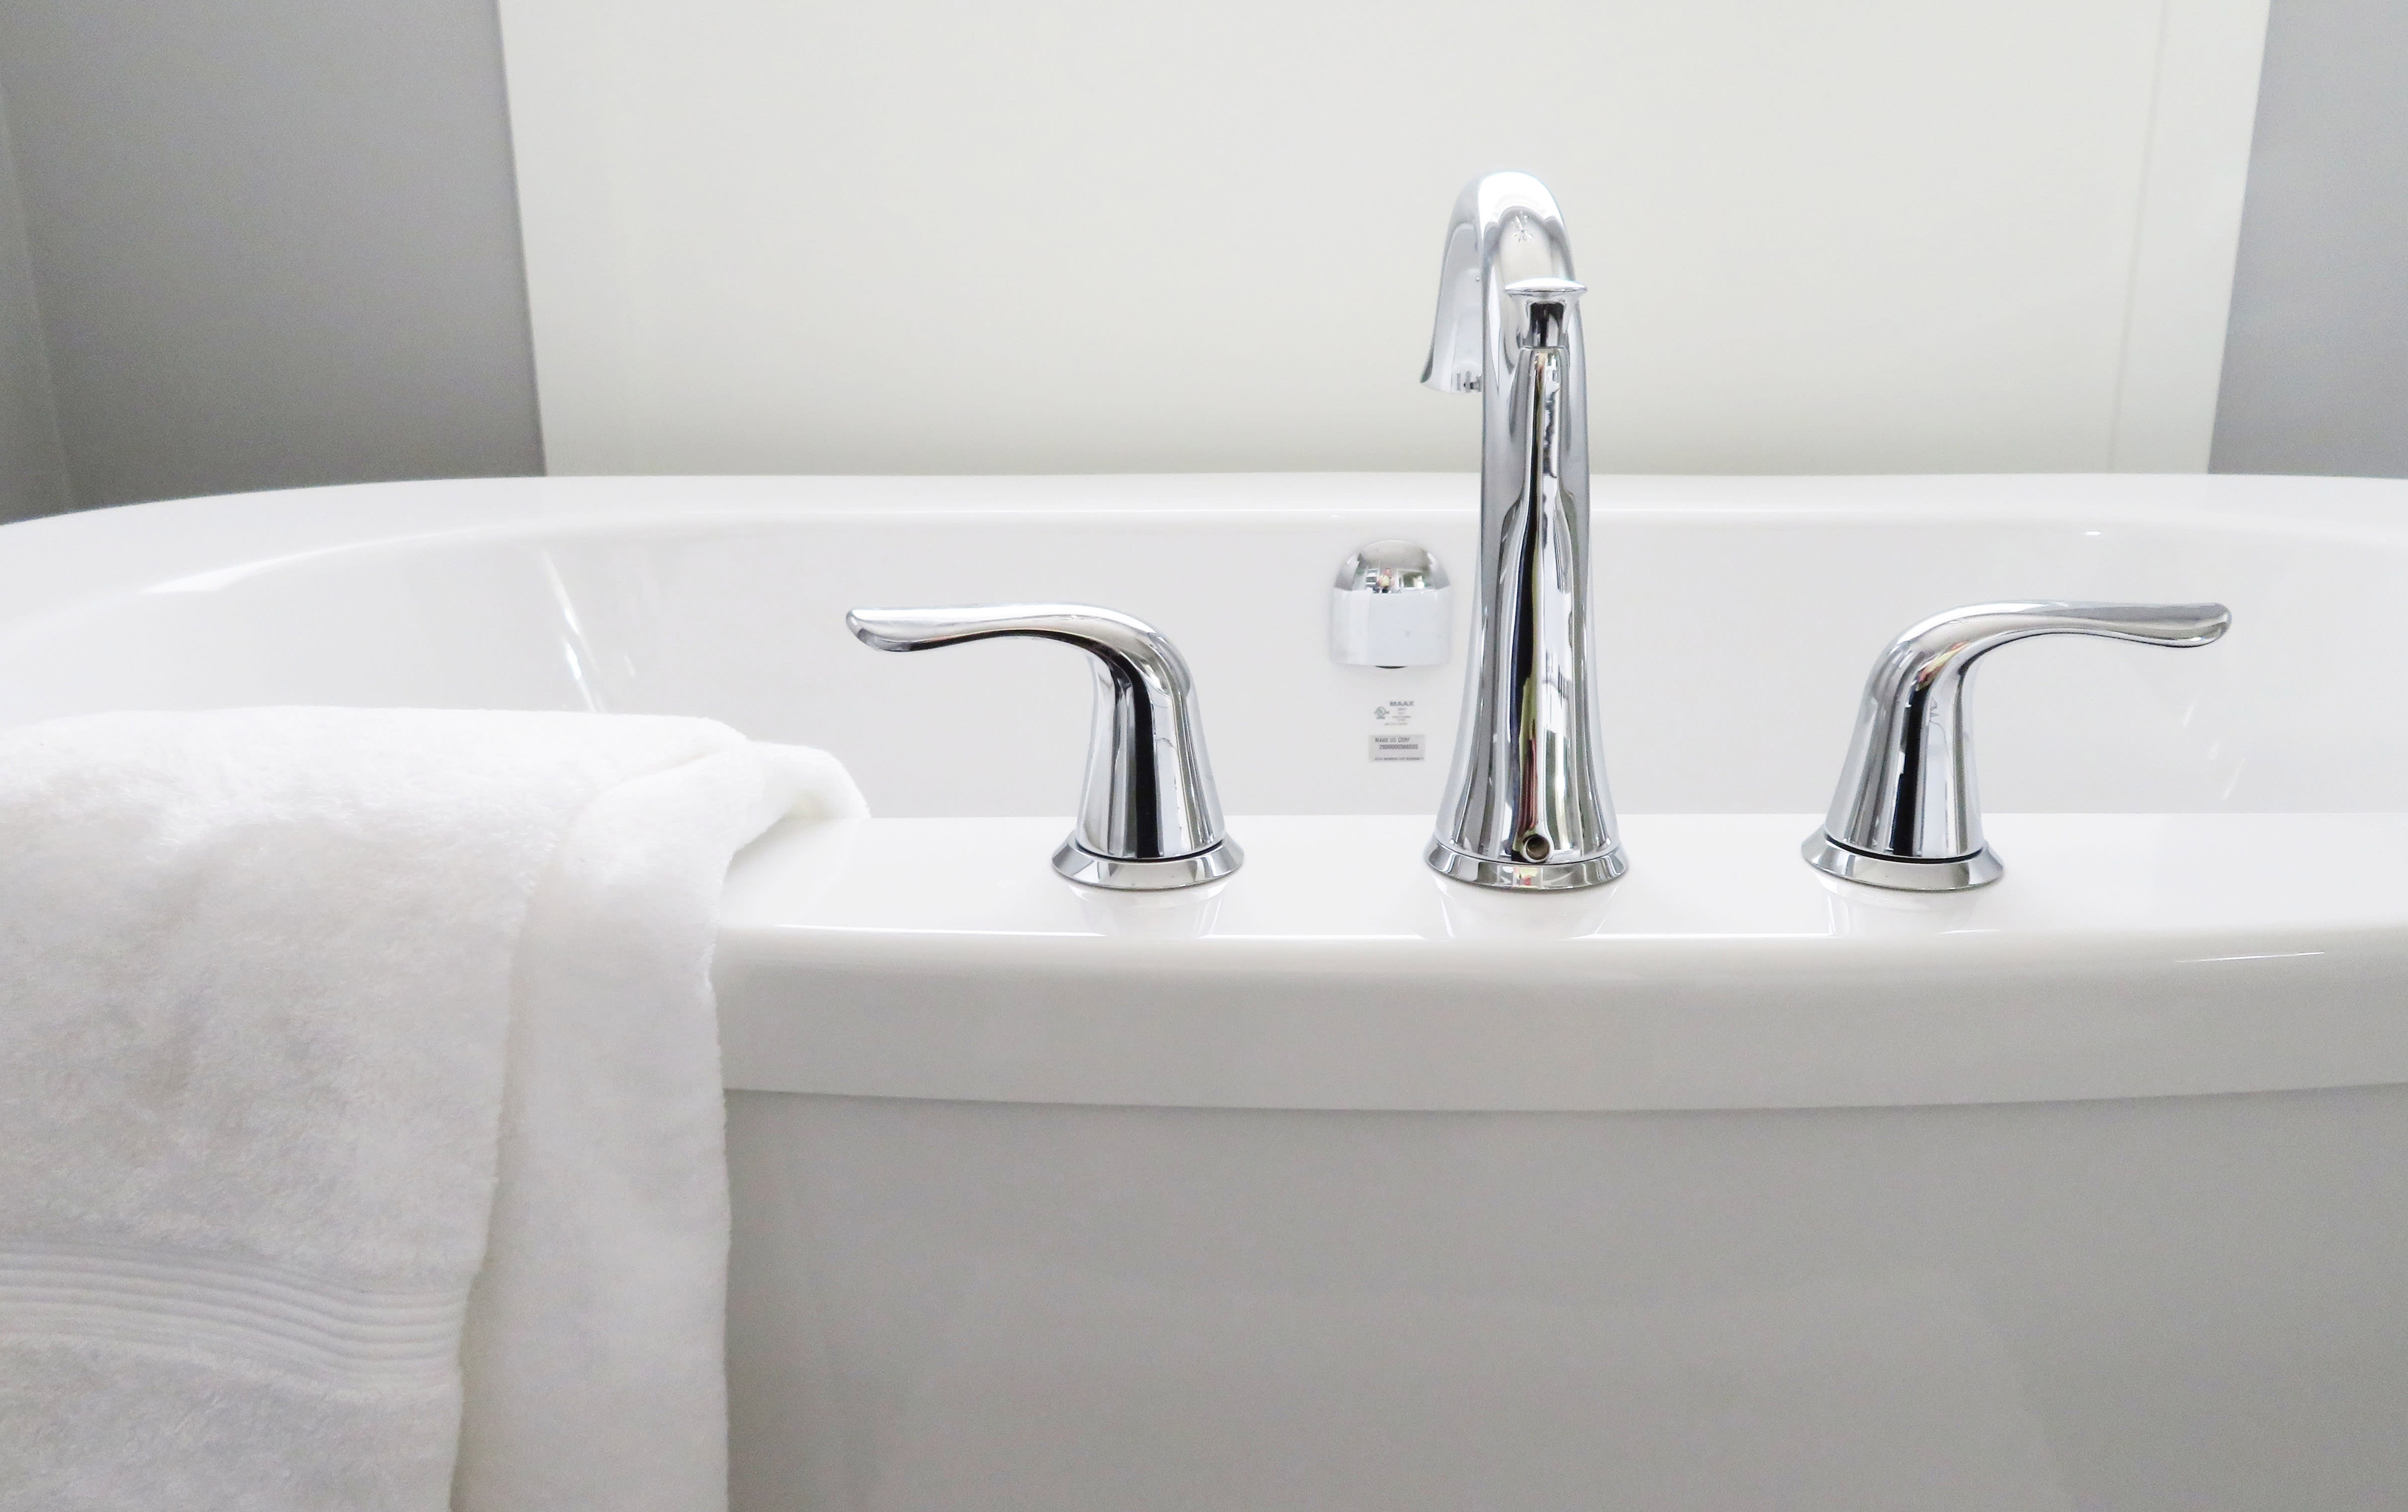 5 Ways To Clean An Old Porcelain Tub, How To Clean An Old Stained Porcelain Bathtub